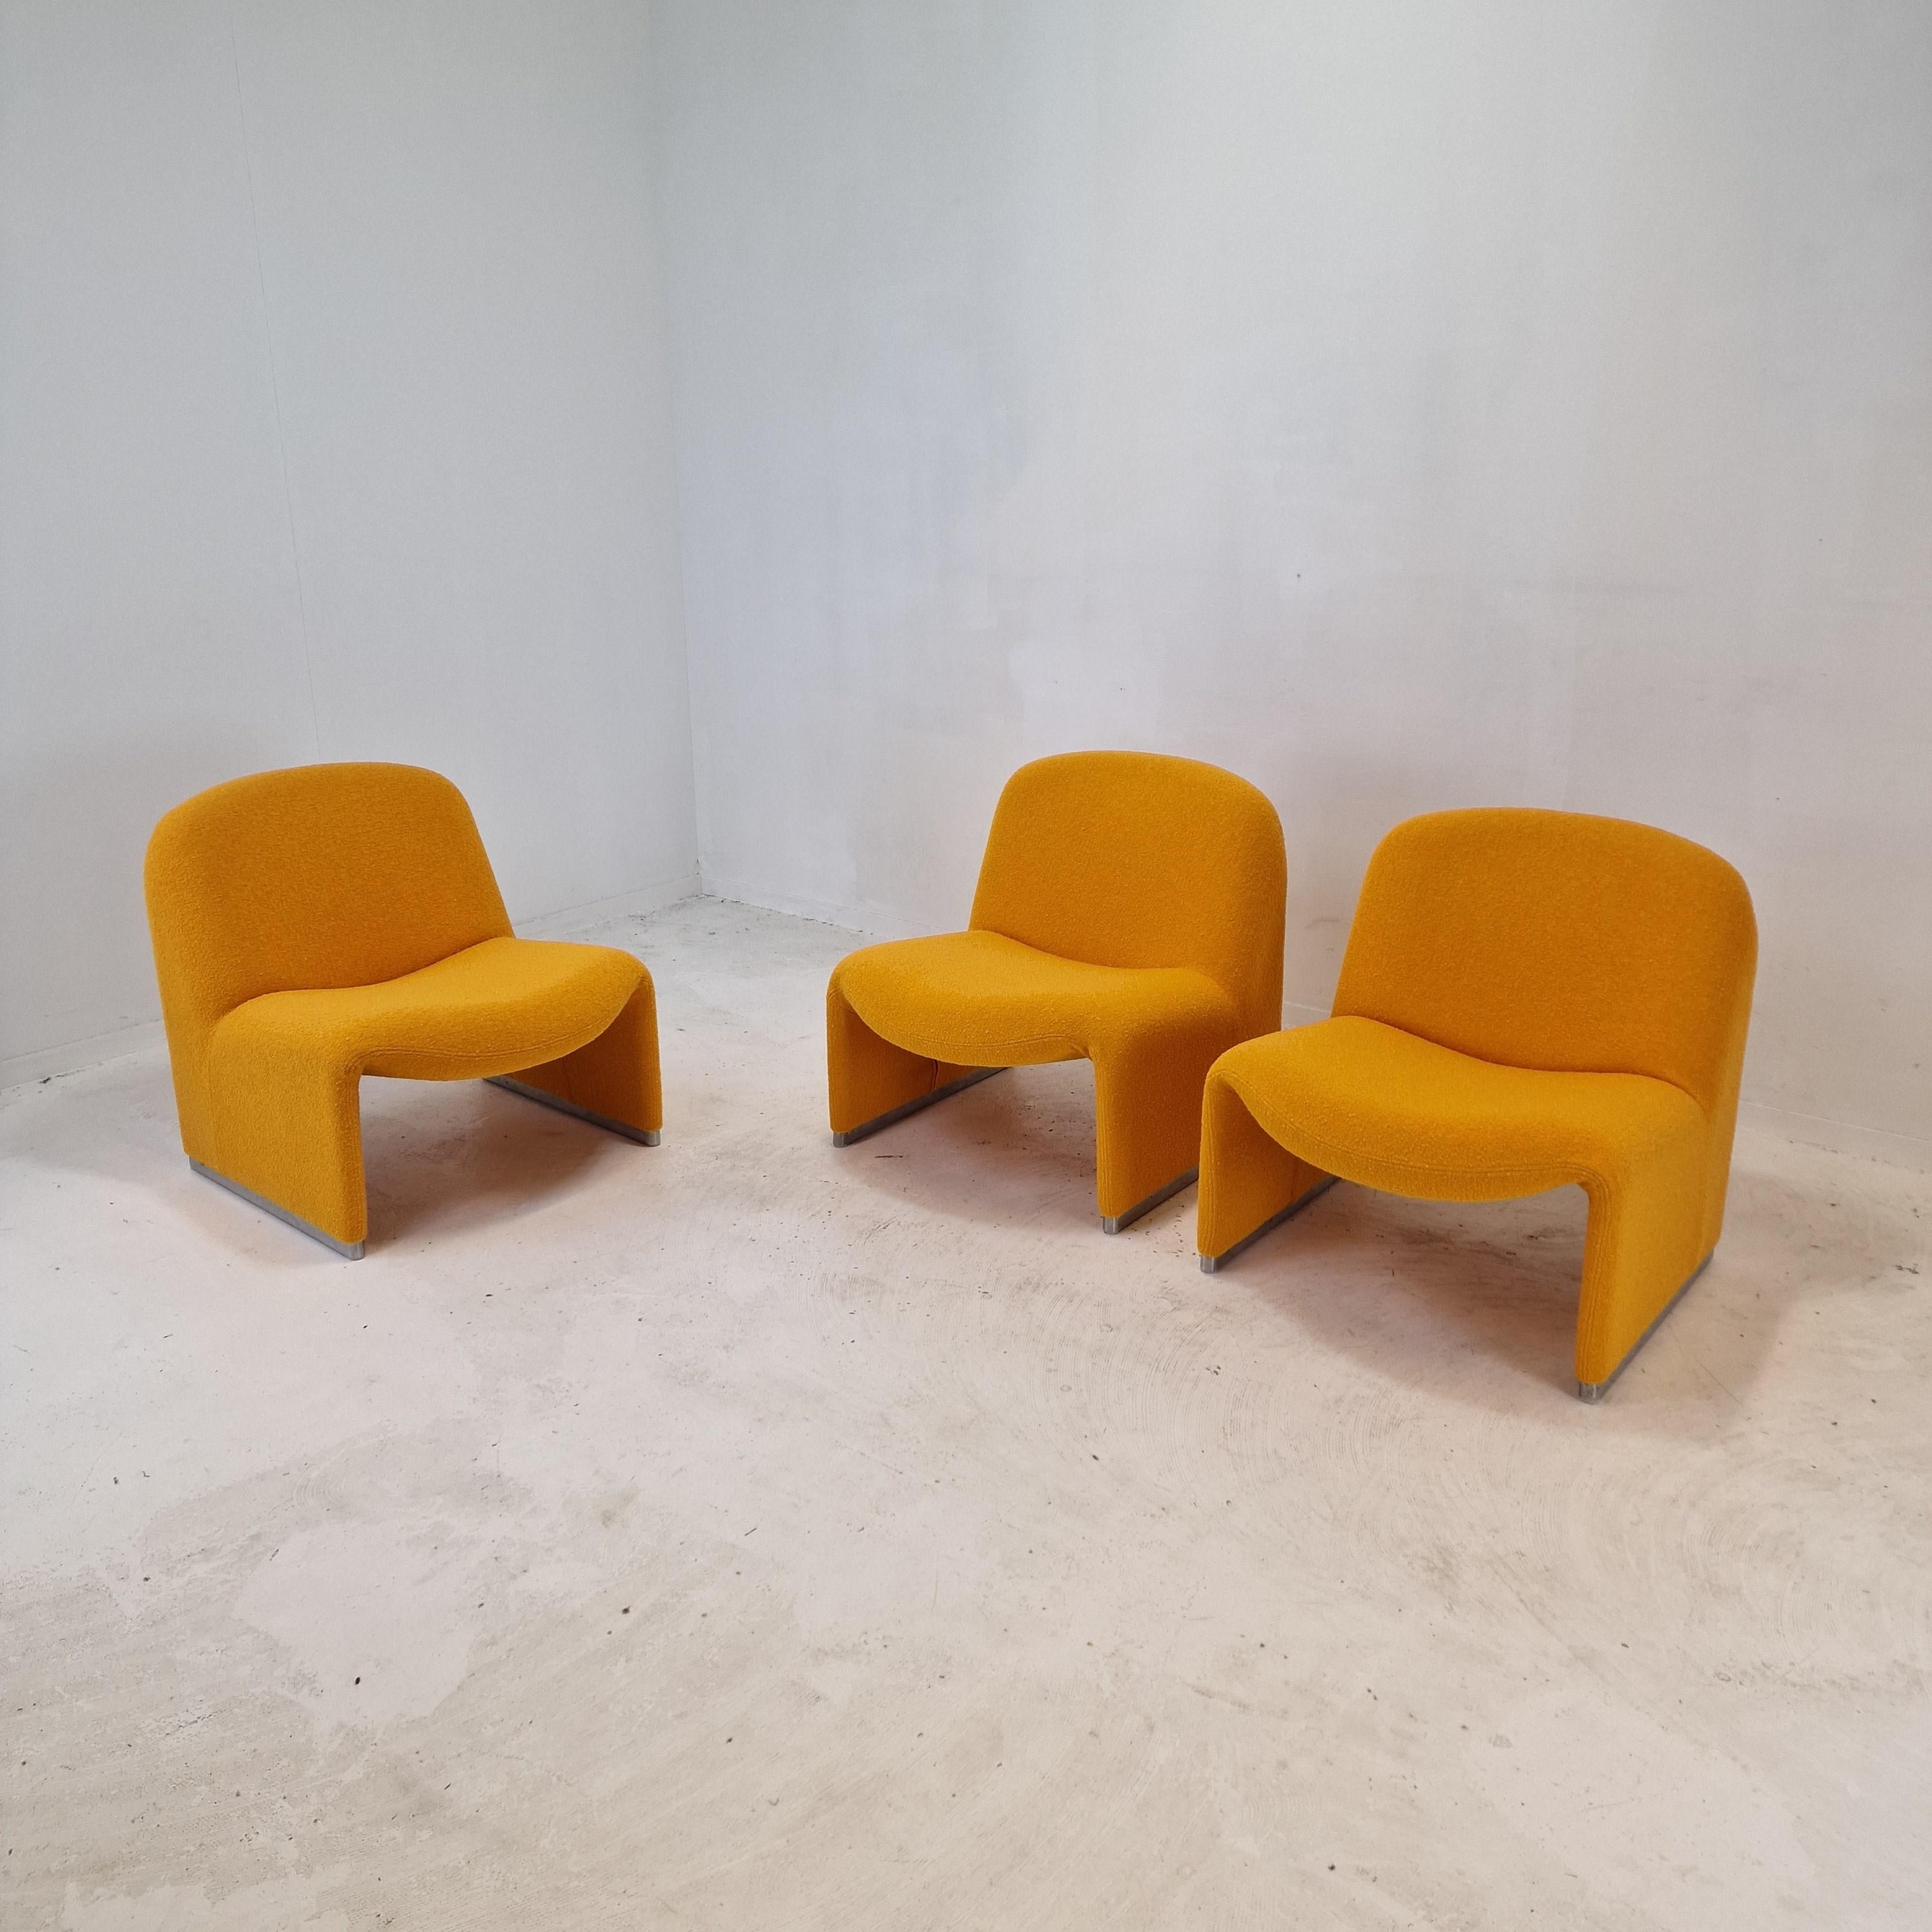 Lovely and comfortable Alky chair. 
Designed by Giancarlo Piretti in 1969, produced by Artifort. 

There are 3 chairs available, the price is for 1 chair.
They are just reupholstered with very cosy wool fabric in a stunning orange color. 
The chairs